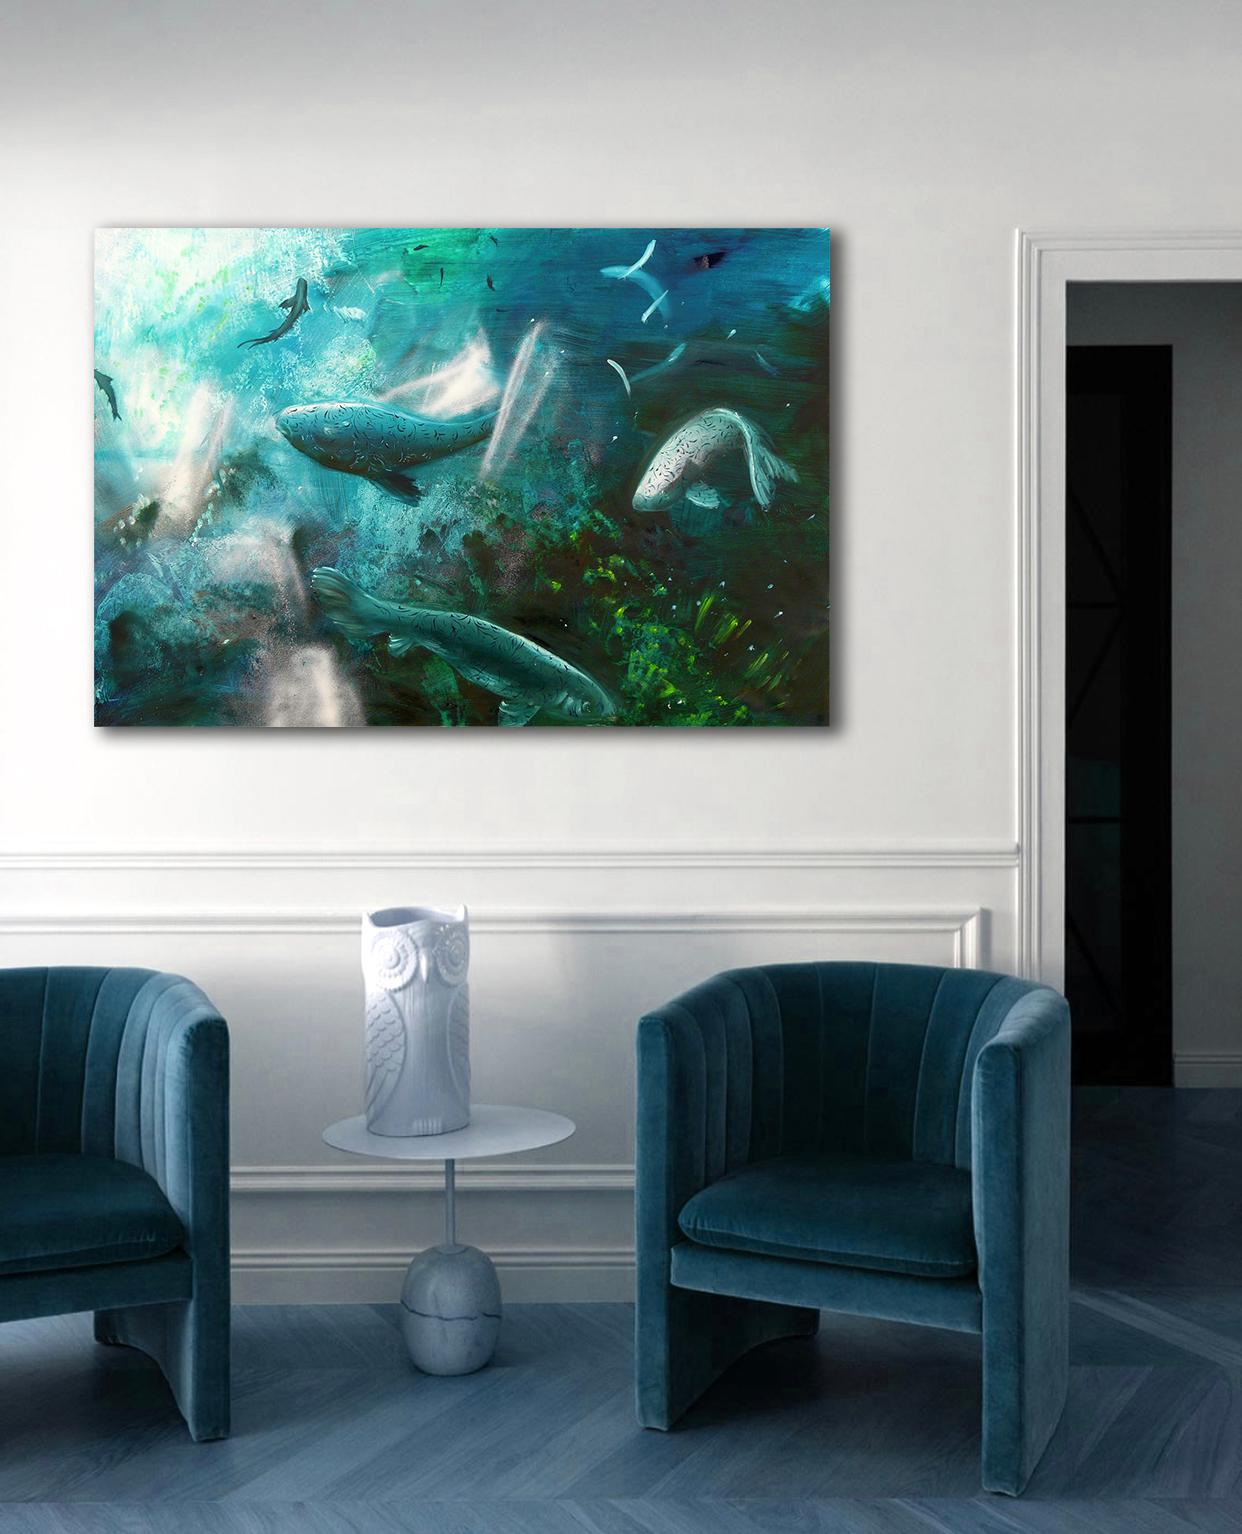 Leibniz Universe 3U - Contemporary and colorful underwater scene, Oil on canvas - Painting by Gian Marco Capraro